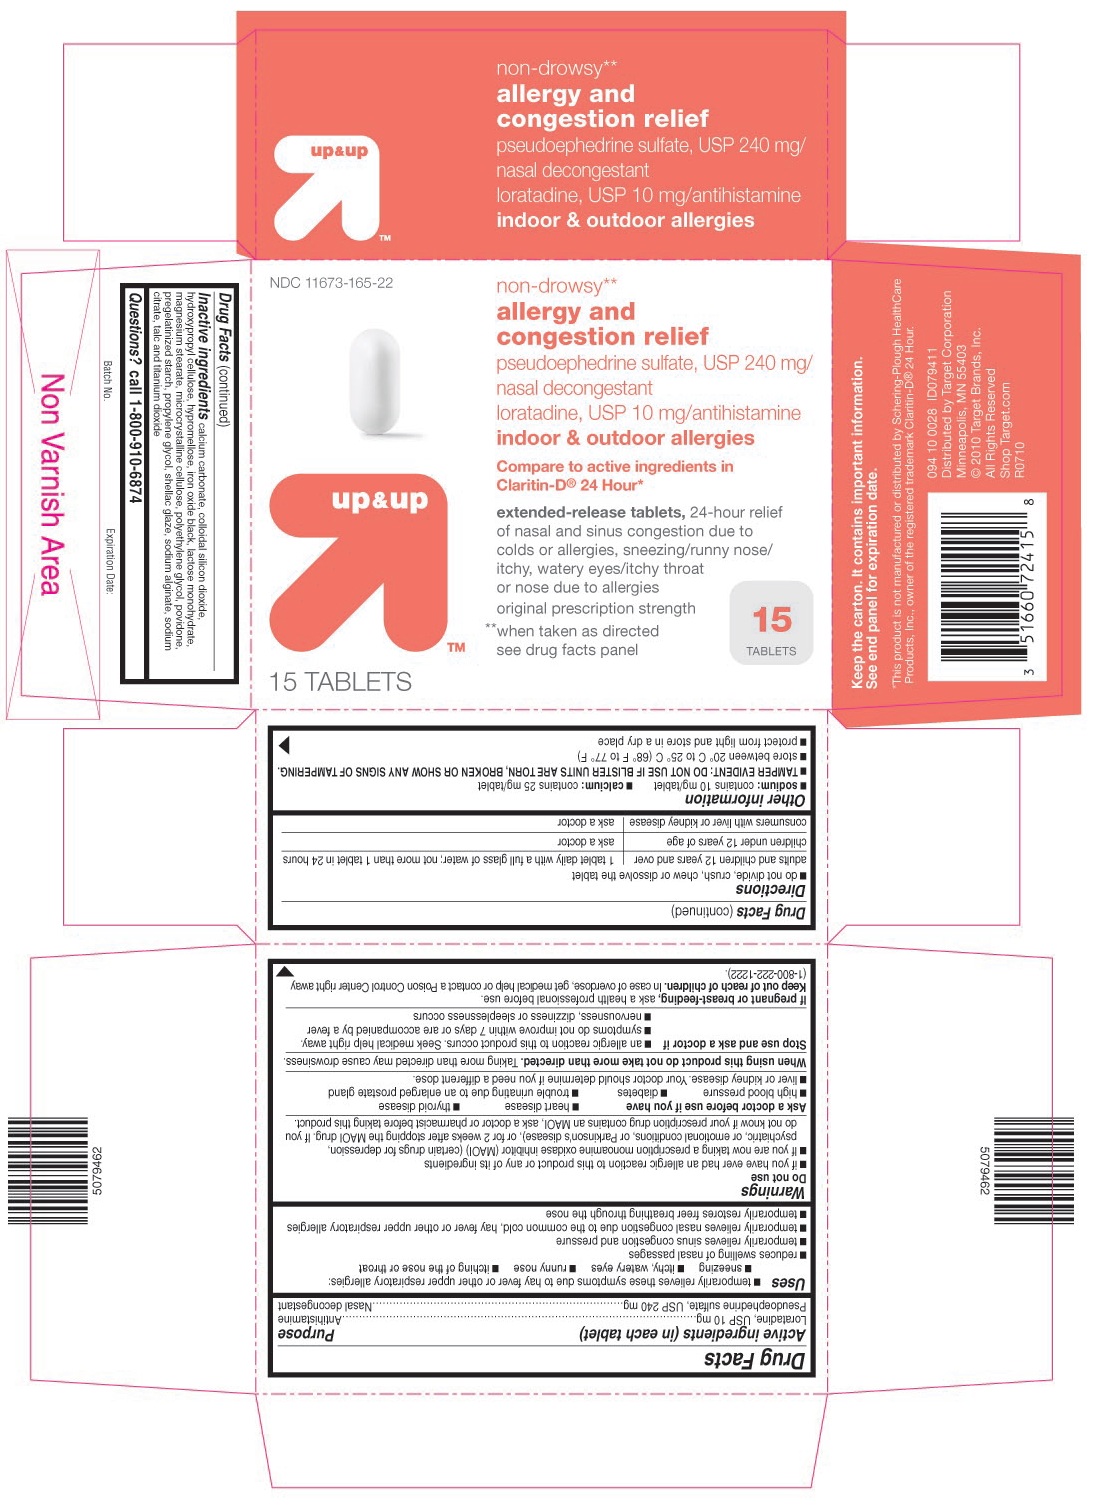 This is the 15 count blister carton label for Target Loratadine D tablets.